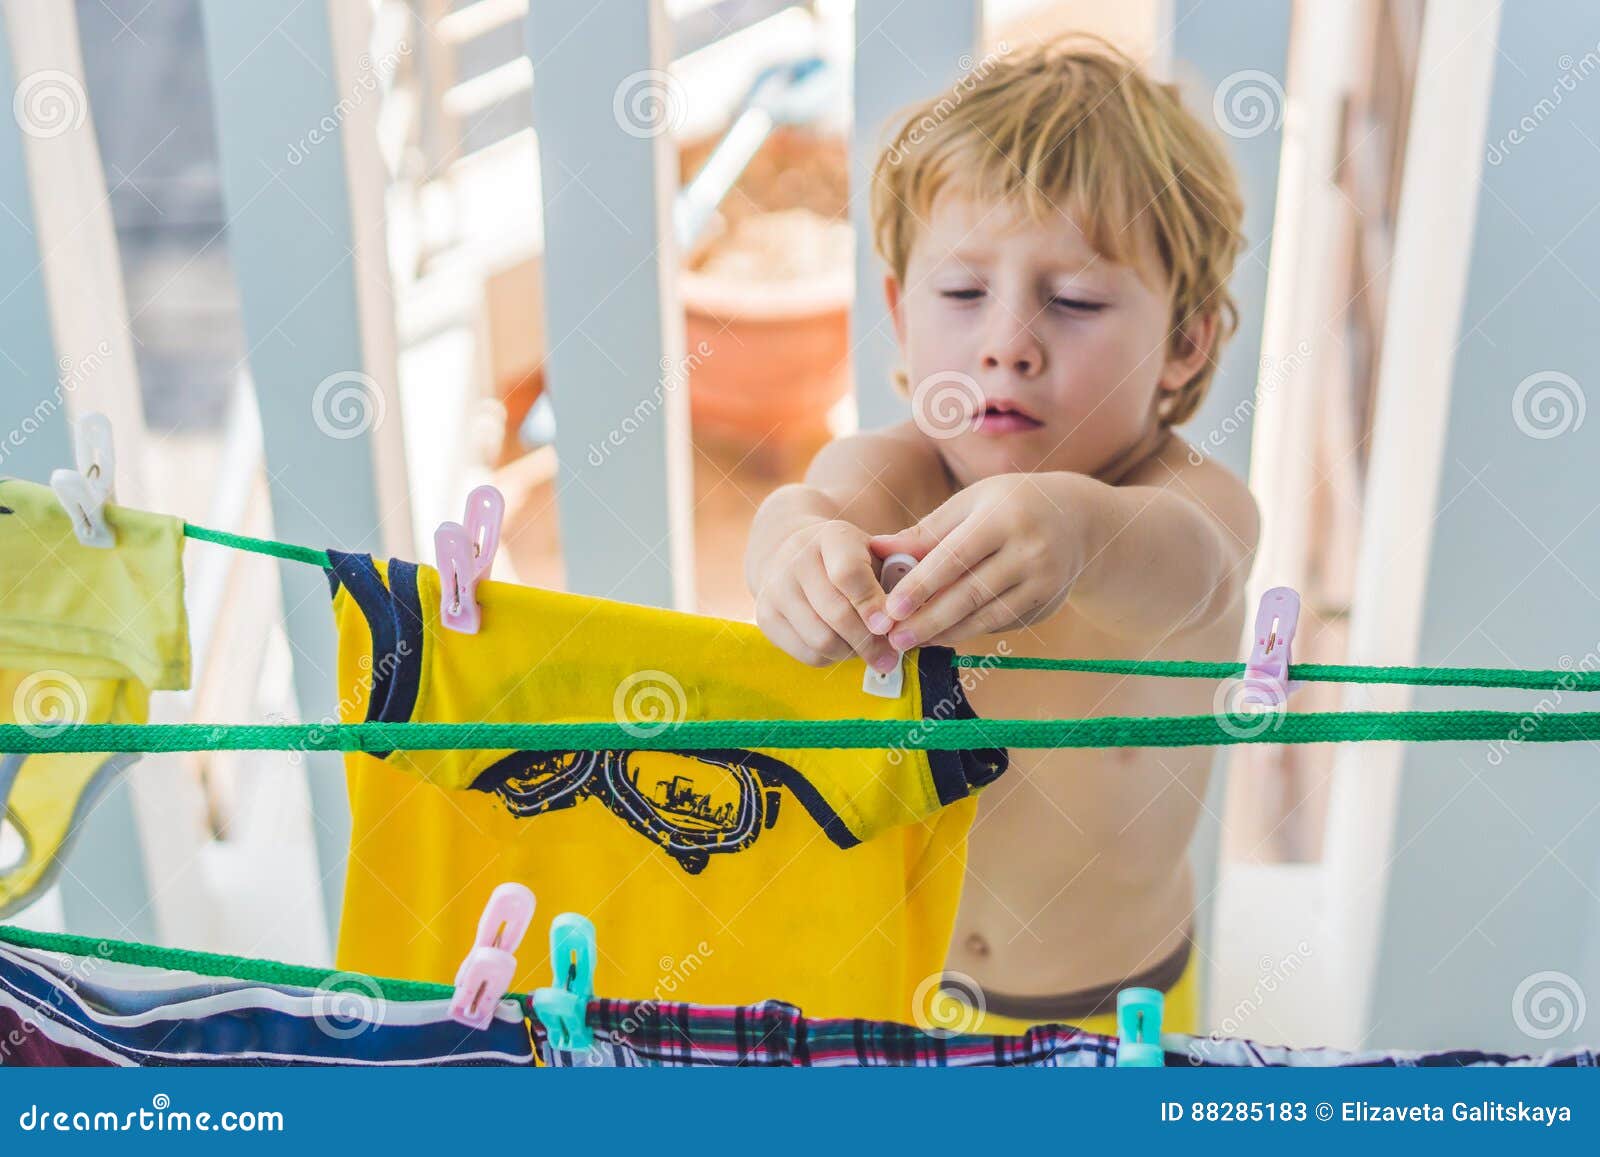 A Little Boy Helps Her Mother To Hang Up Clothes Stock Image - Image of ...